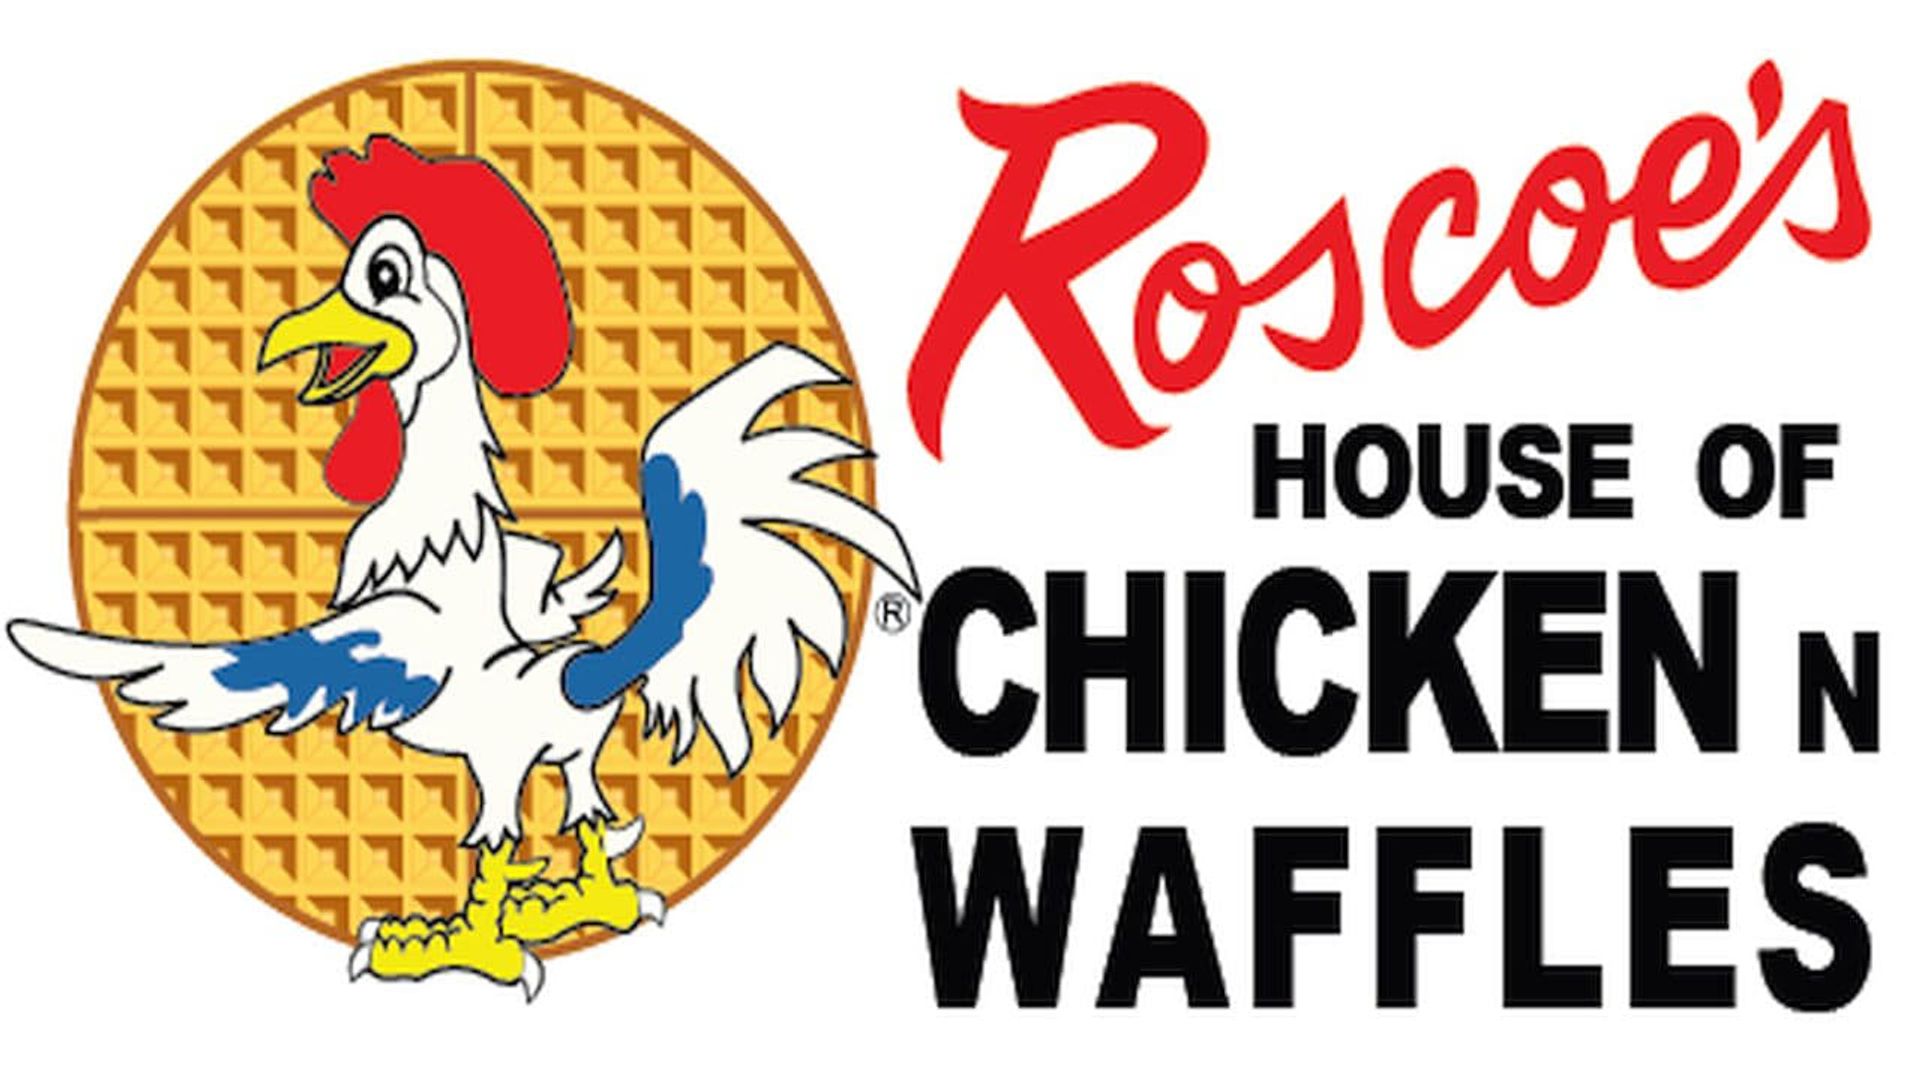 Roscoe's House of Chicken n Waffles background